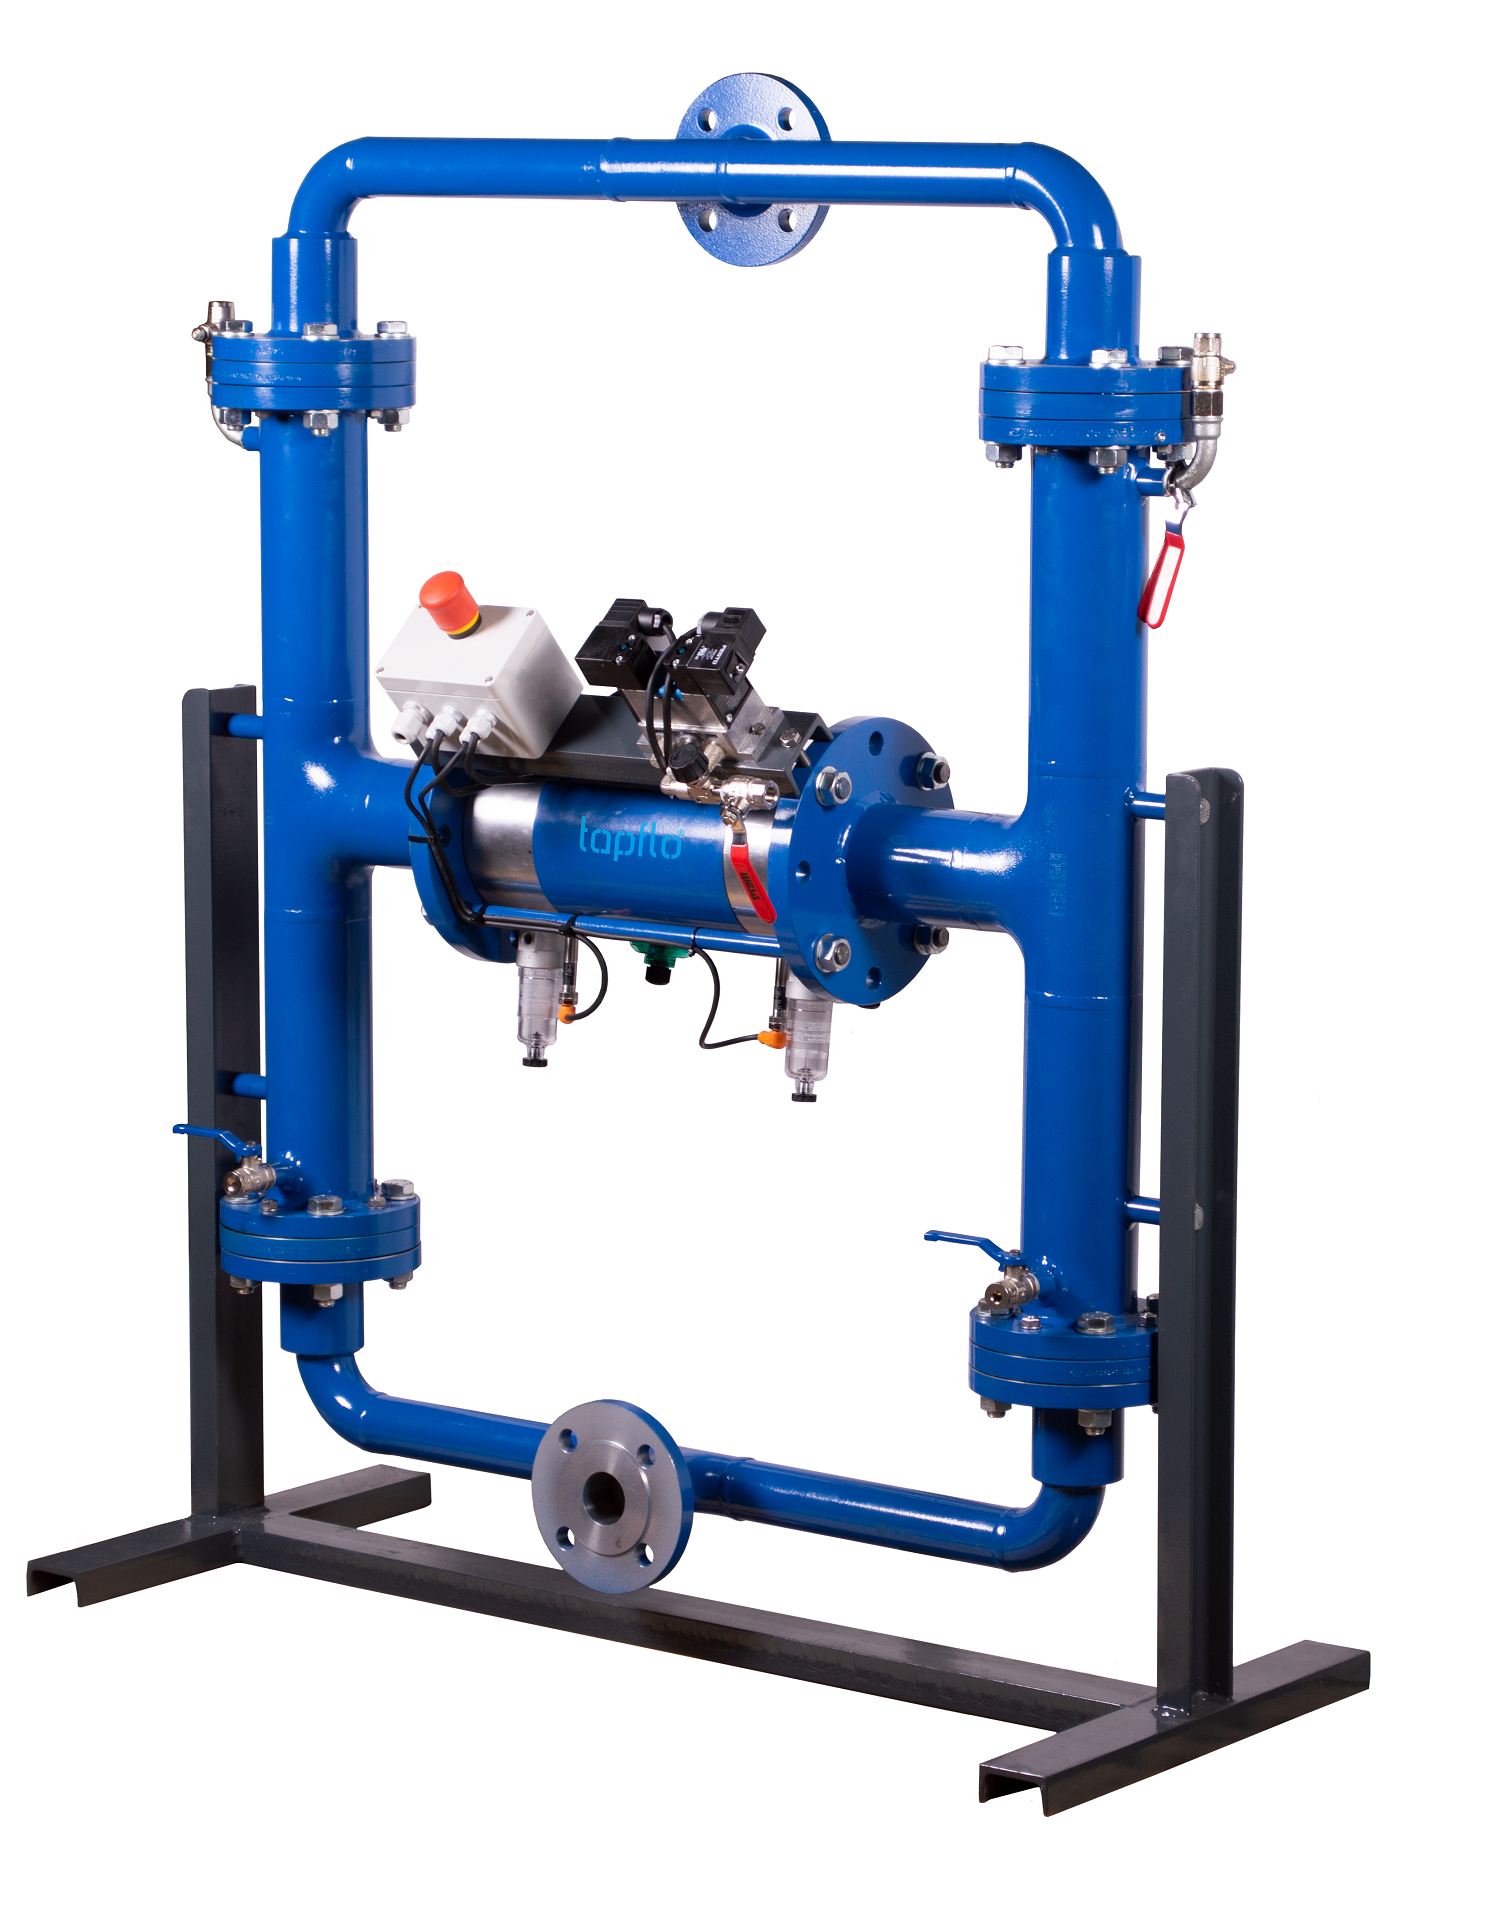 The pump is designed for demanding applications where liquid is transferred to the filter press.